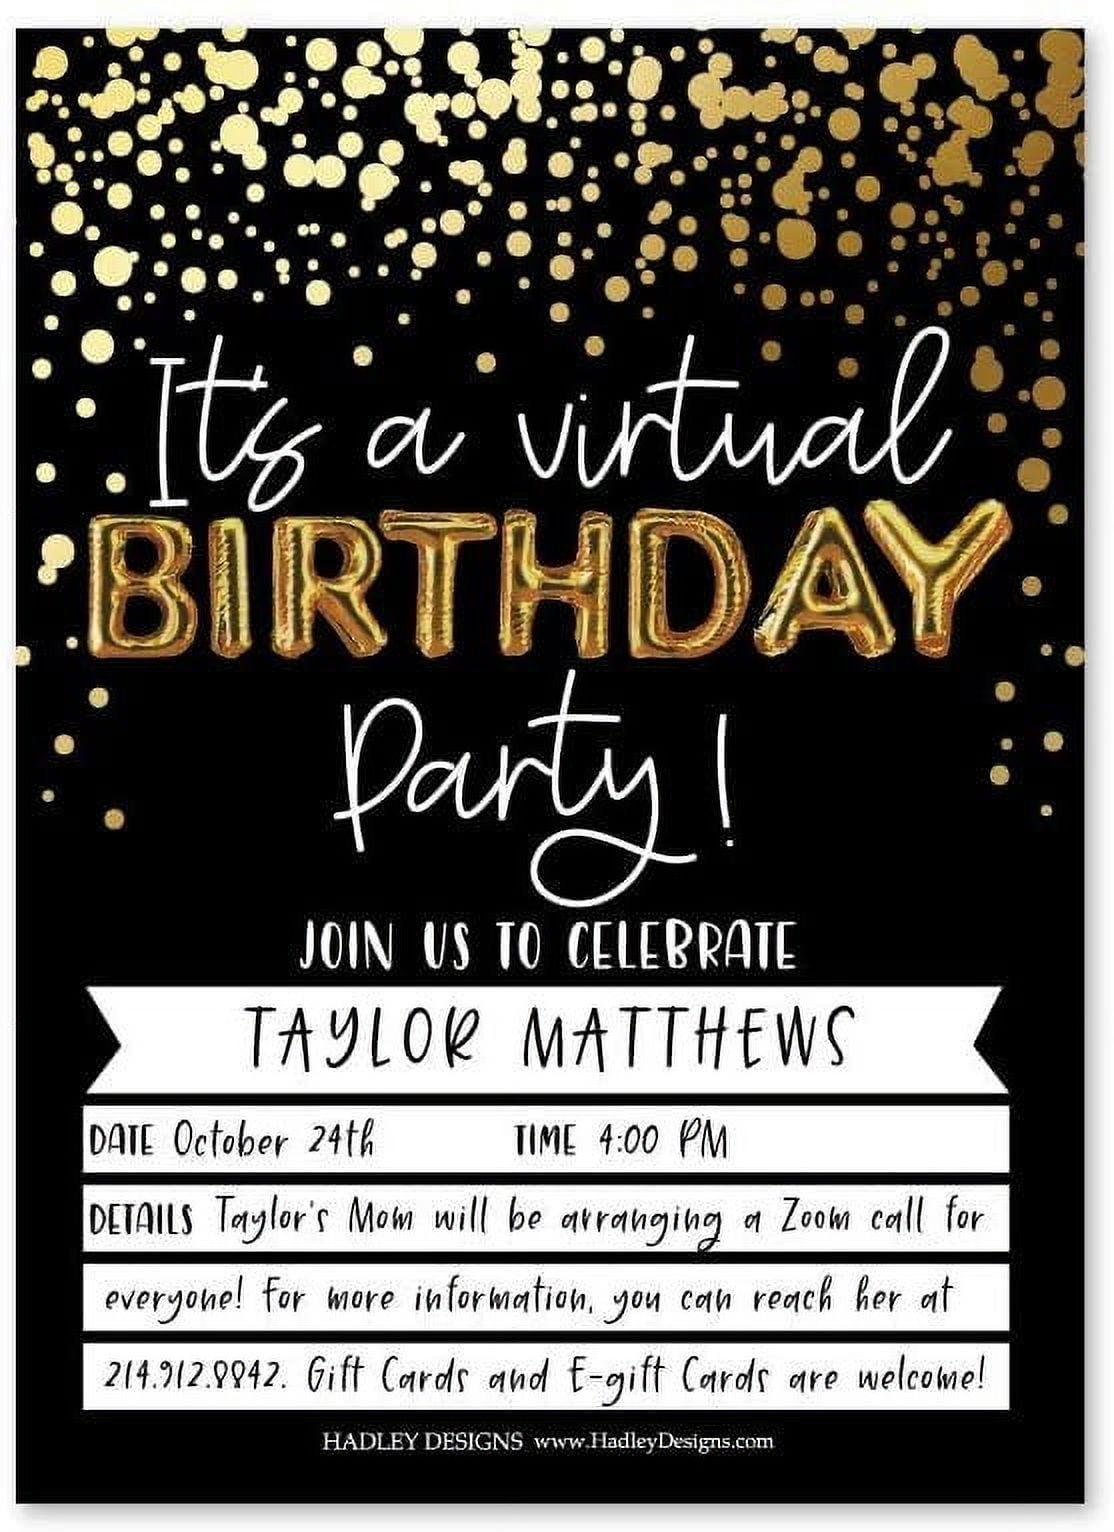 25 Black & Gold Virtual Birthday Party Invitations, Modern Elegant Themed  Invite for Toddlers, Kids, Children, Teen or Adults, Let\'s Celebrate Your  Cute Baby Girl or Boys 1st Bday in Quarantine -